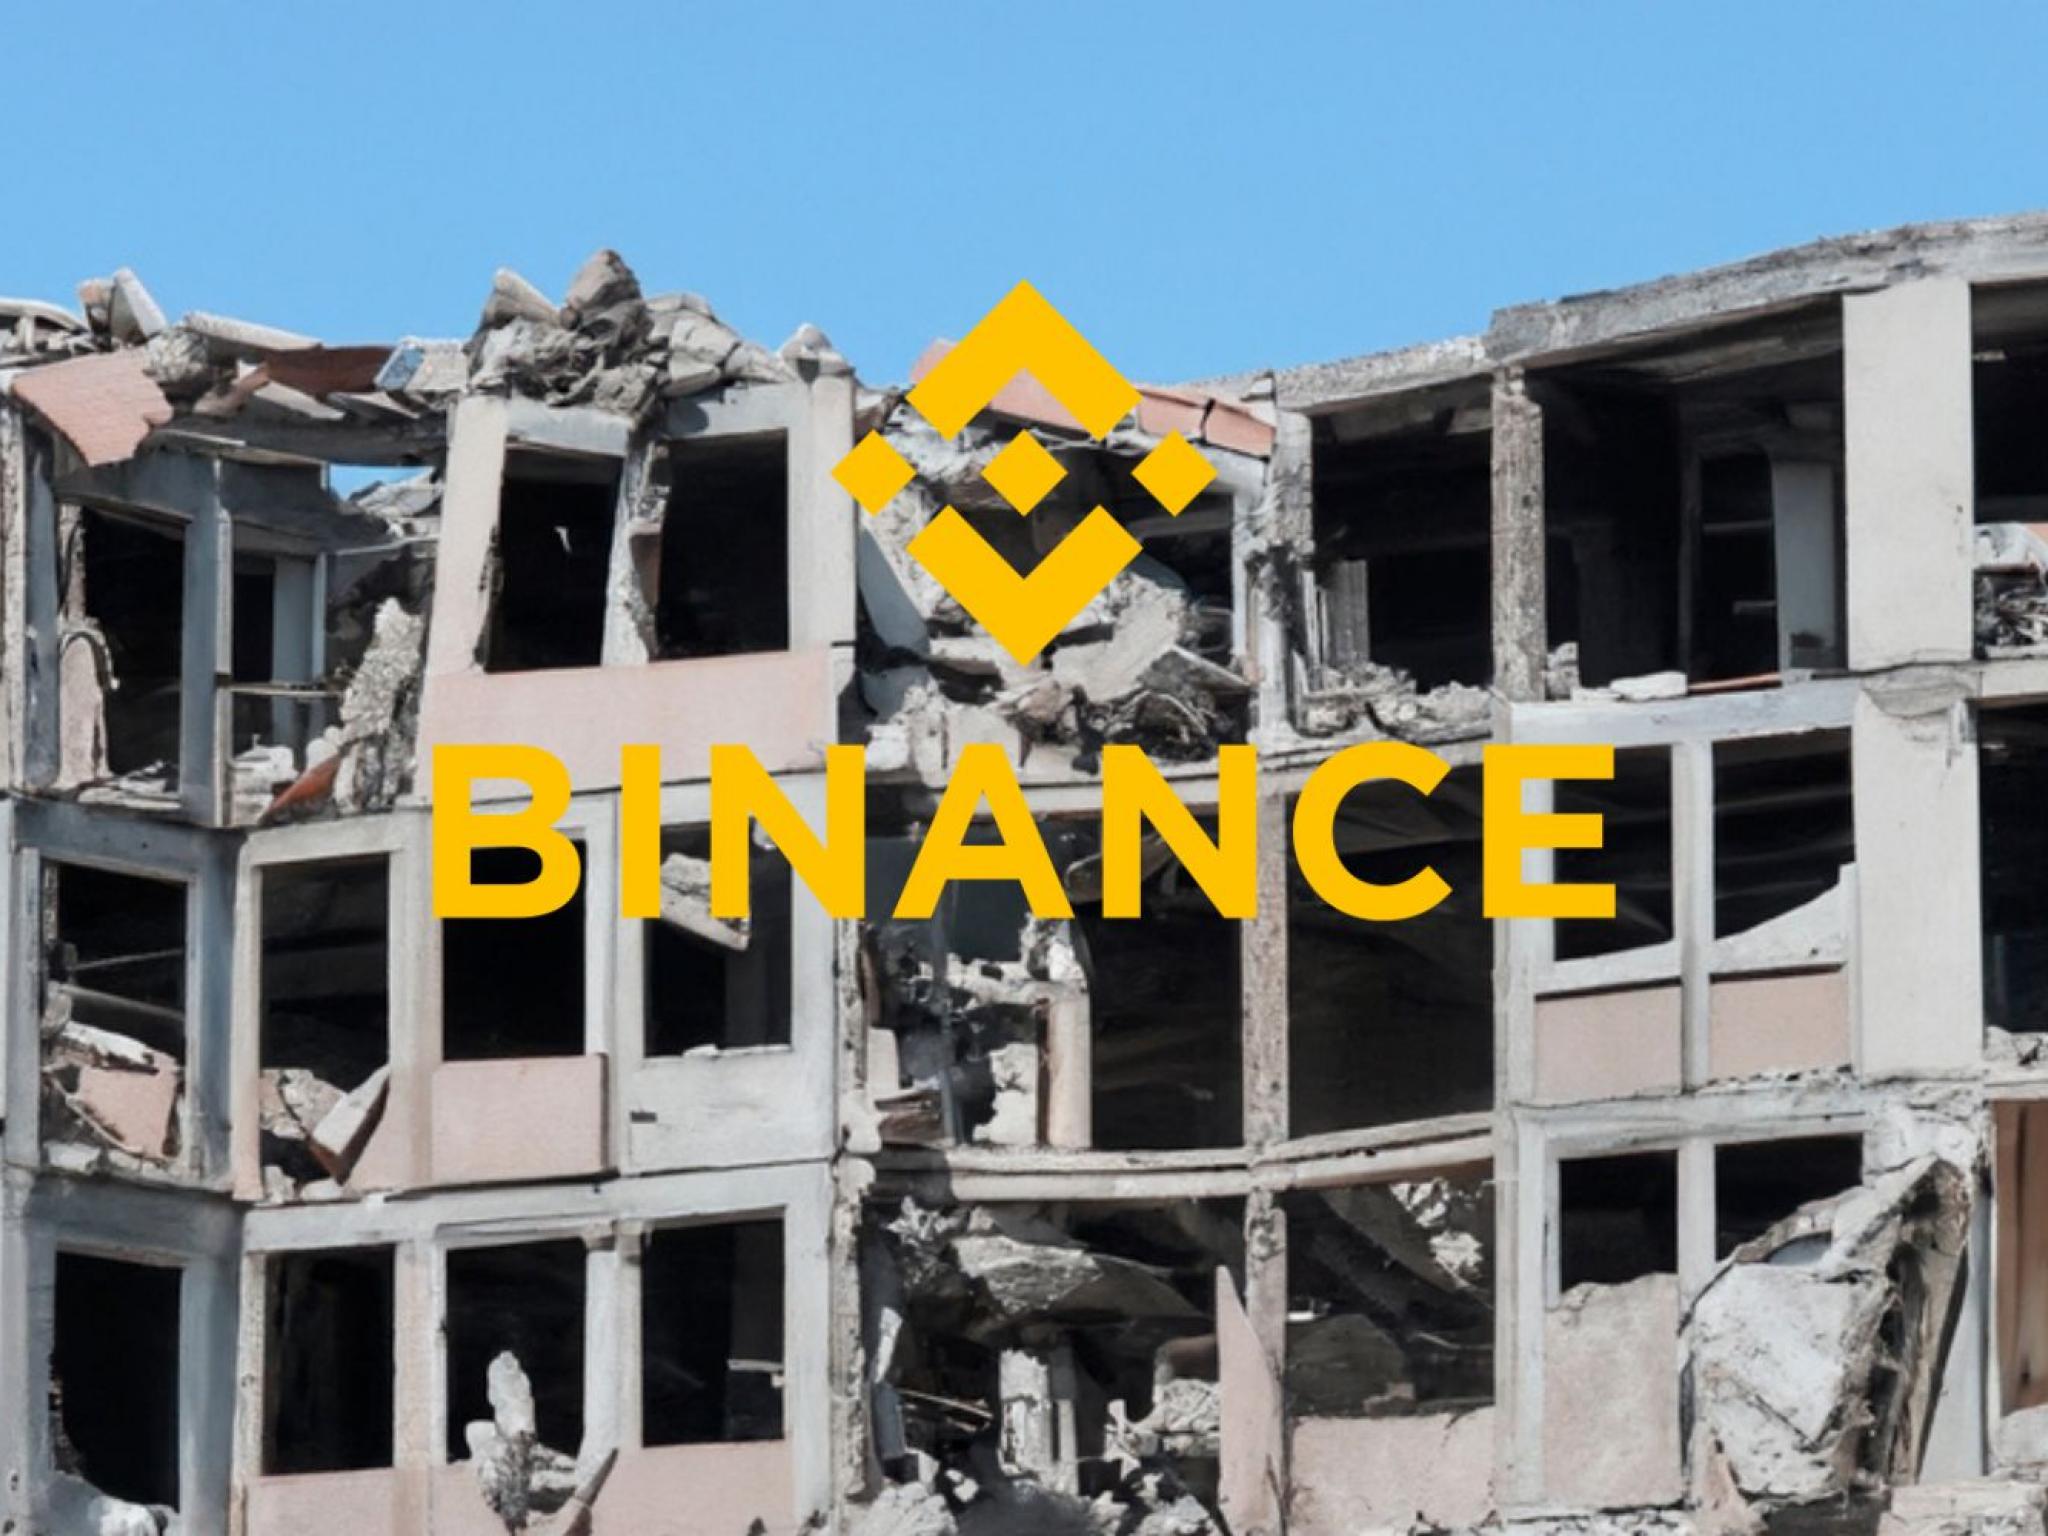  binance-steps-up-3m-in-bnb-donated-to-earthquake-hit-morocco 